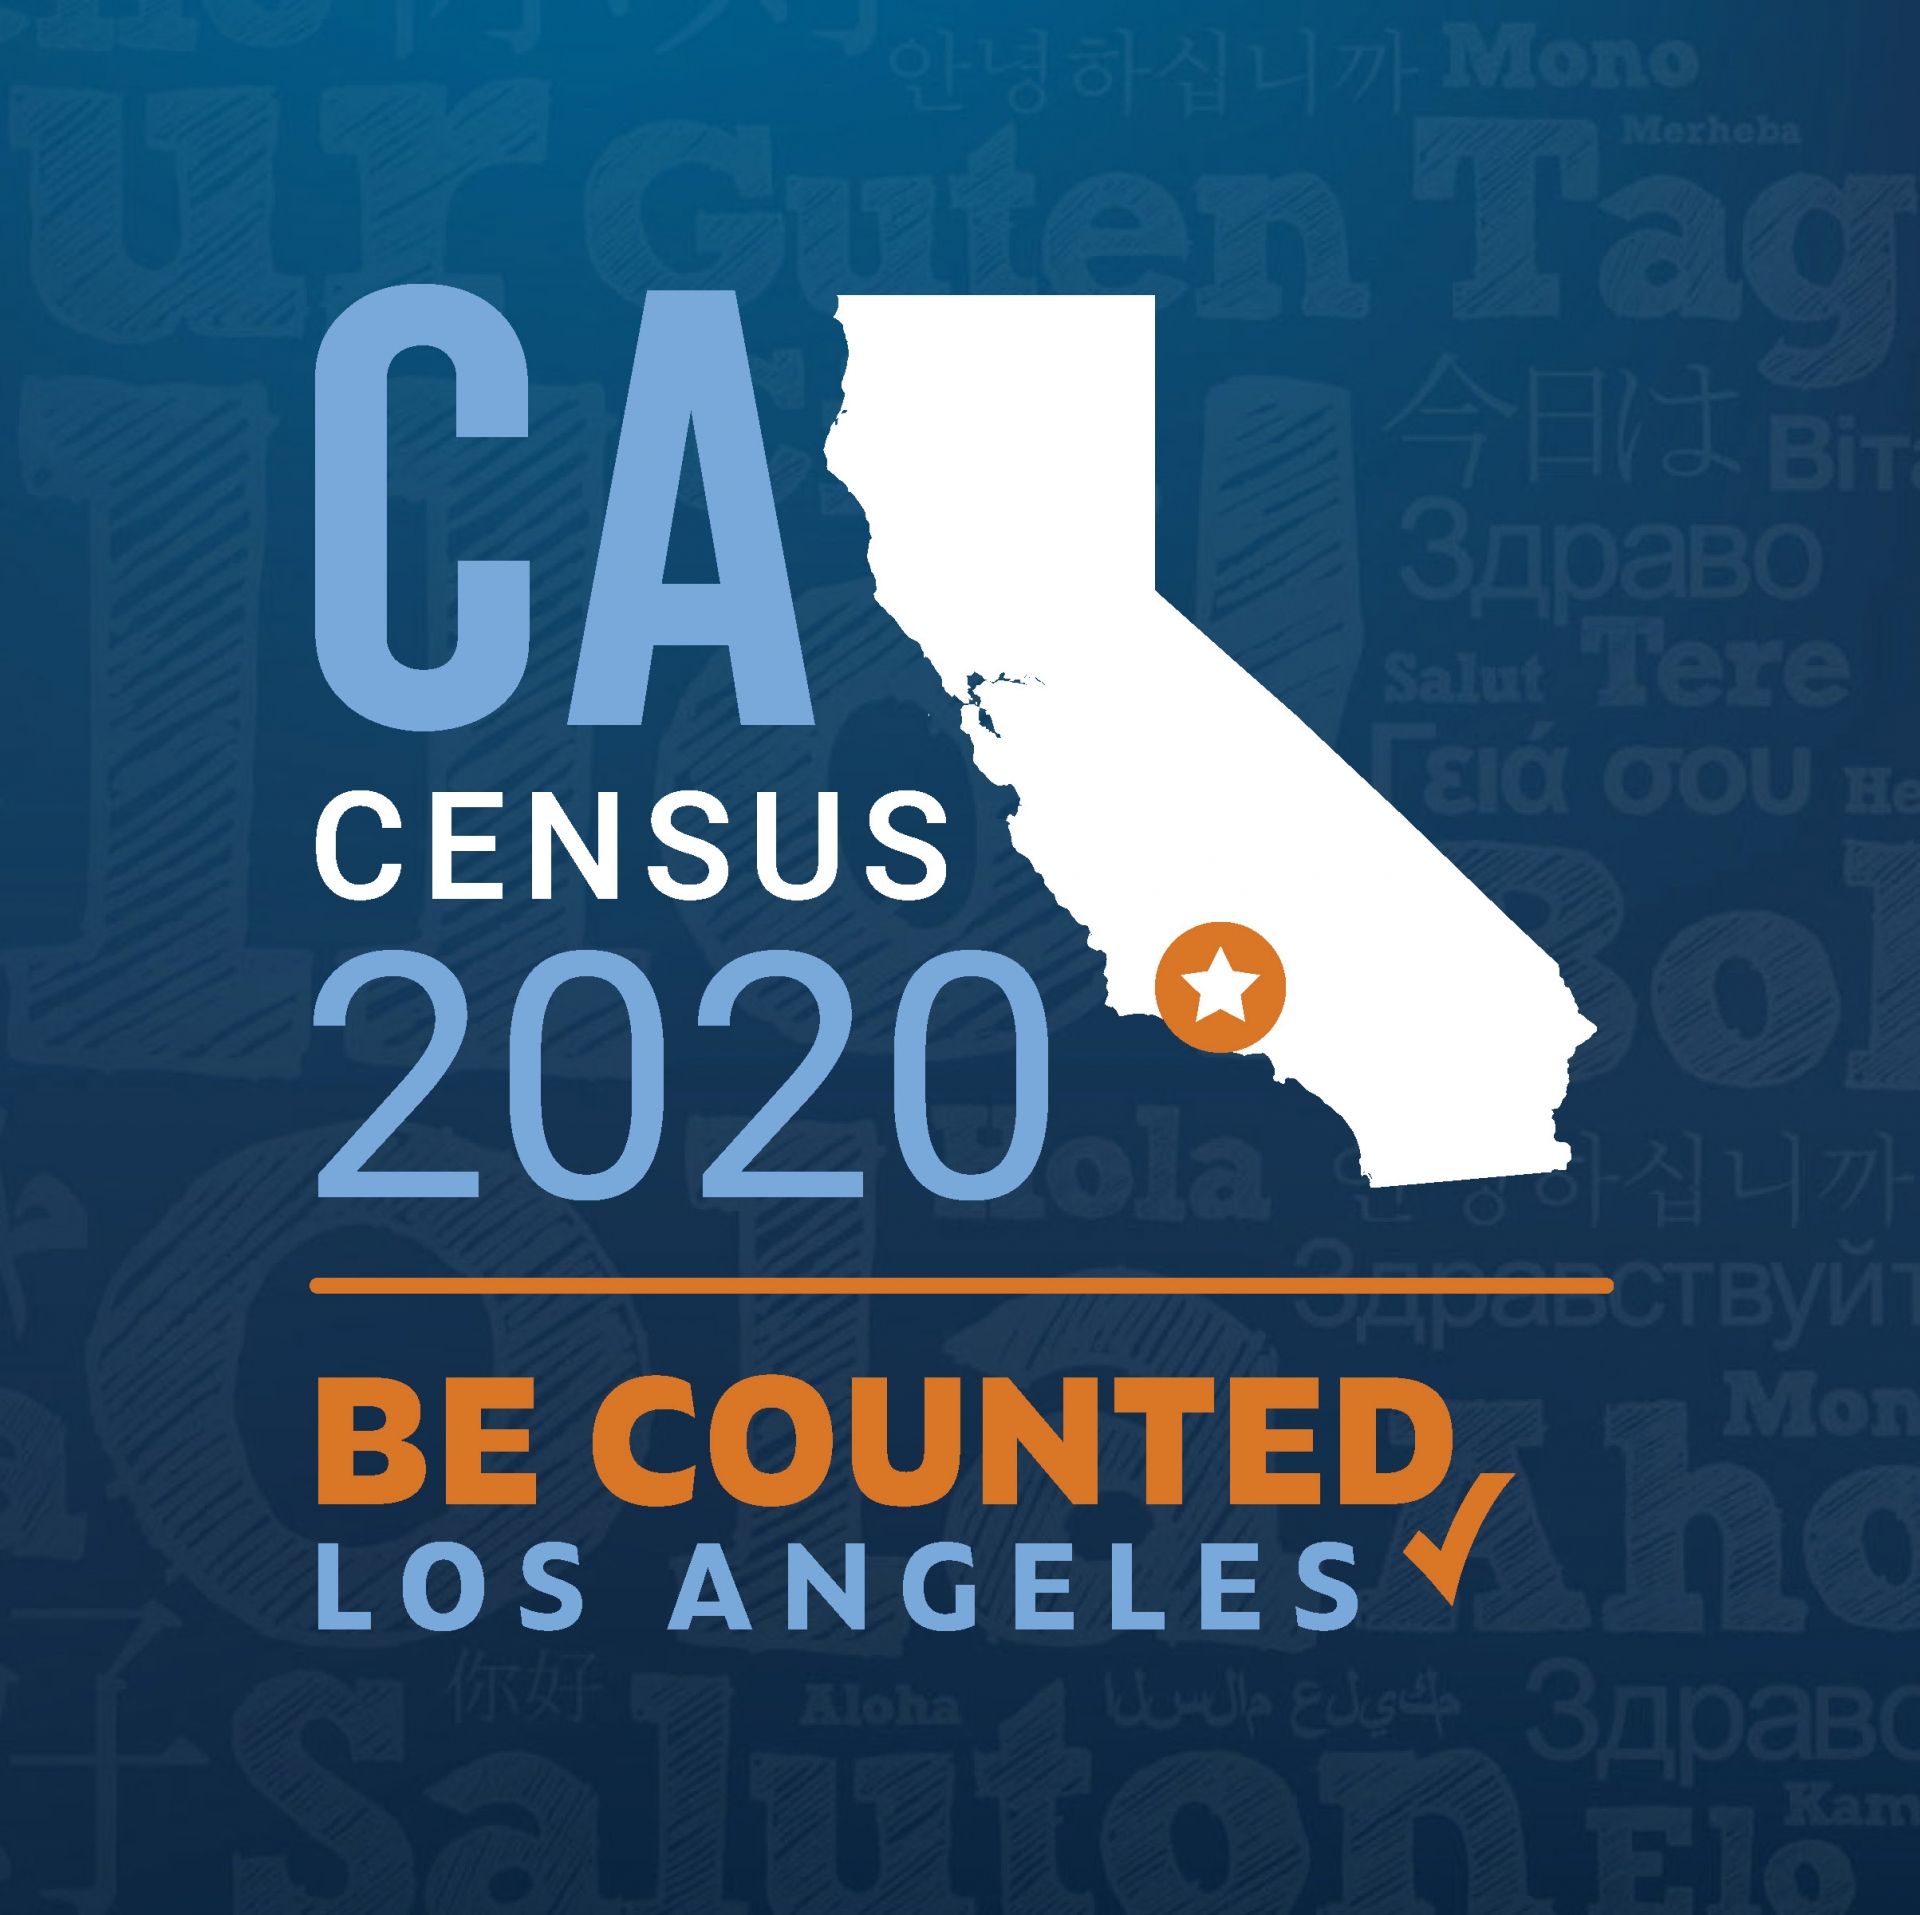 California Census 2020 Logo with map and text Be Counted Los Angeles.